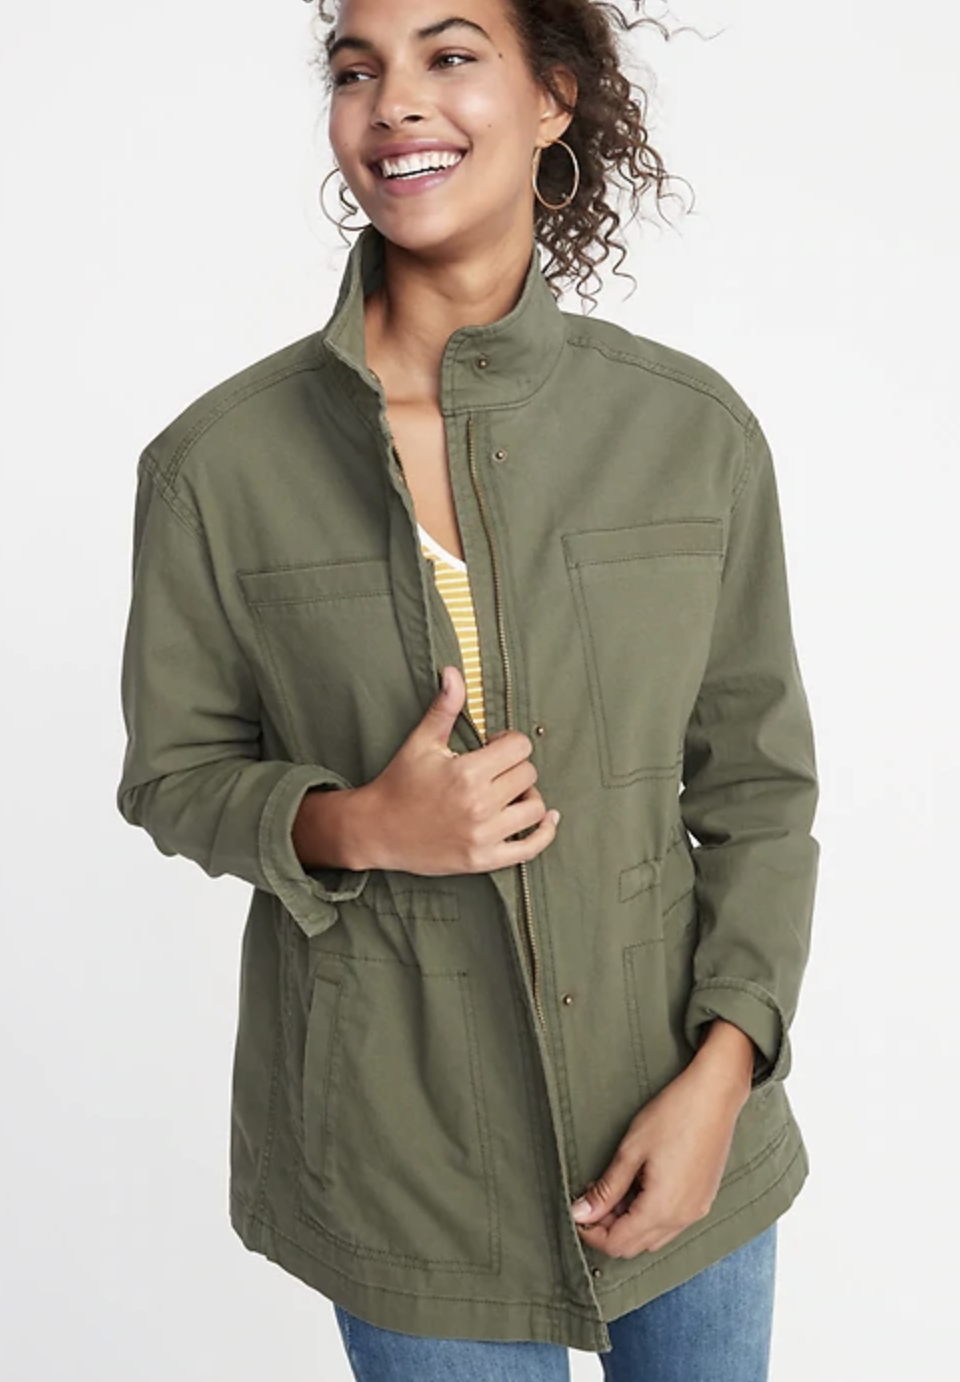 old navy utility jacket.png